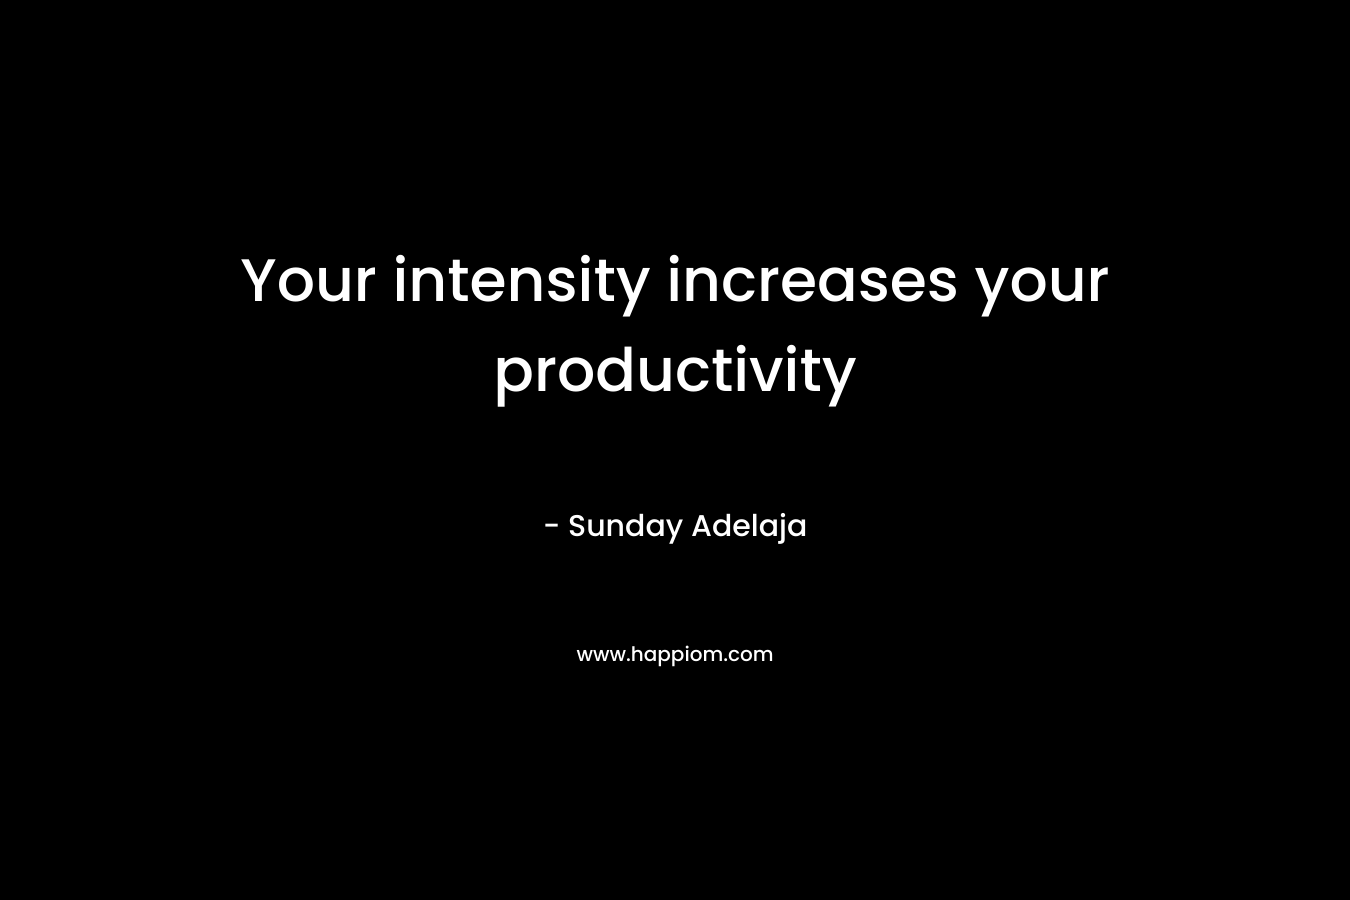 Your intensity increases your productivity